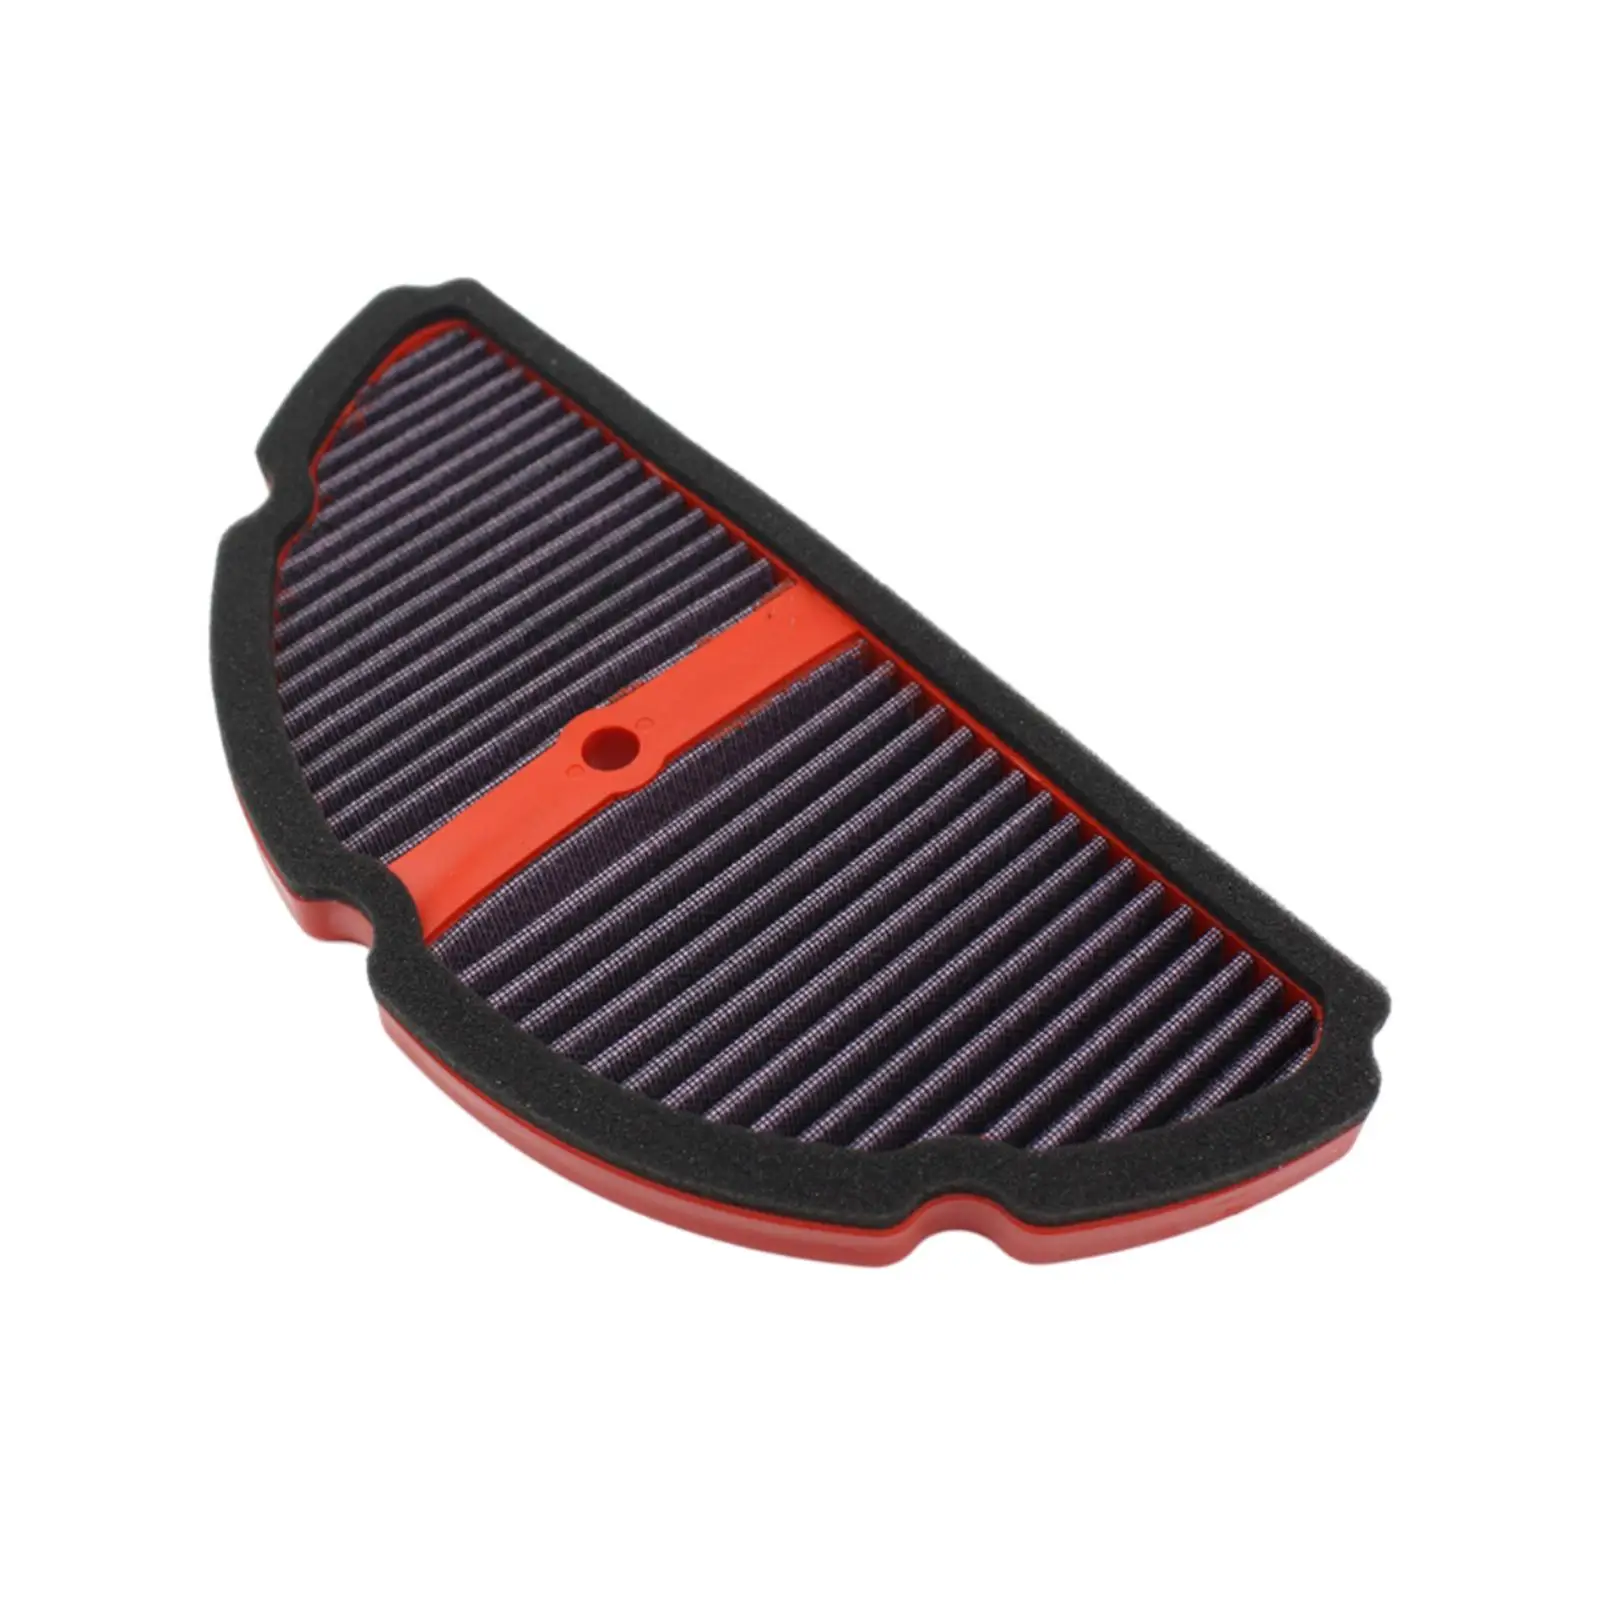 Motorbike Air Filter Intake Accessories Air Filters for Benellis BN502 2014-2019 BN502R 2017-19 Tnt600 2018-19 Bj600